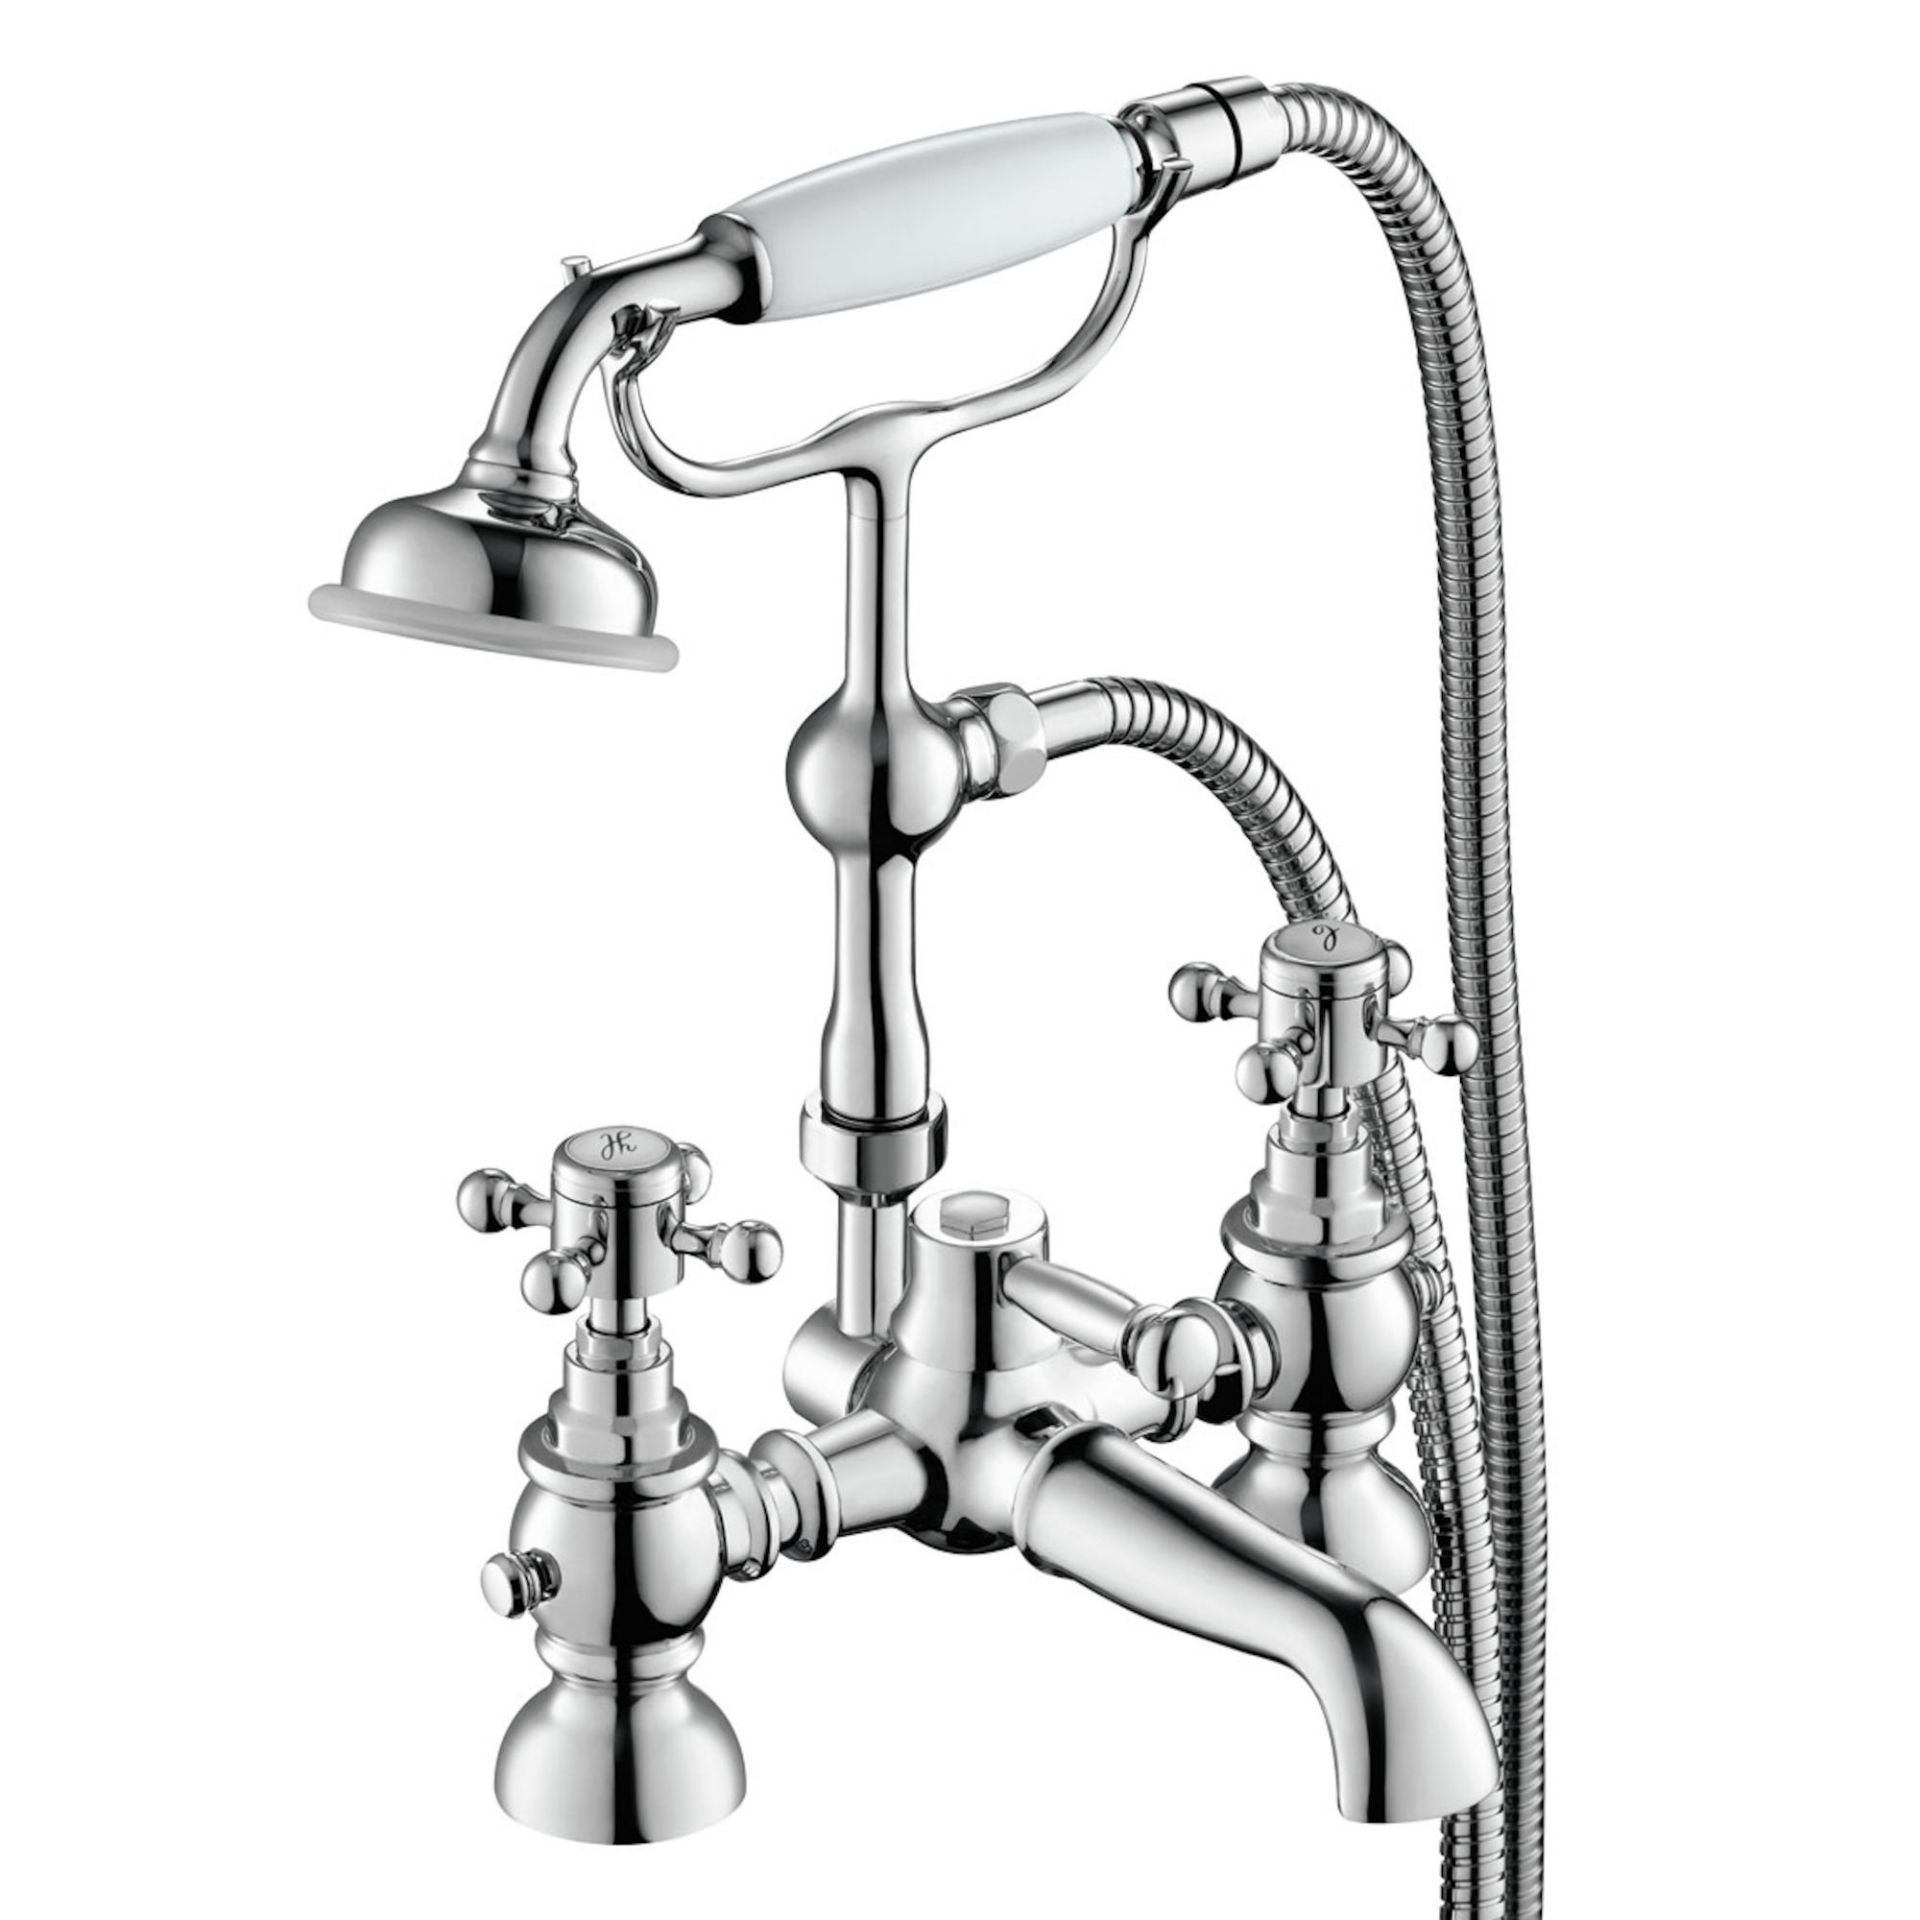 (XM64) Cambridge Bath Shower Mixer - Traditional Tap with Handheld Shower We love this because it